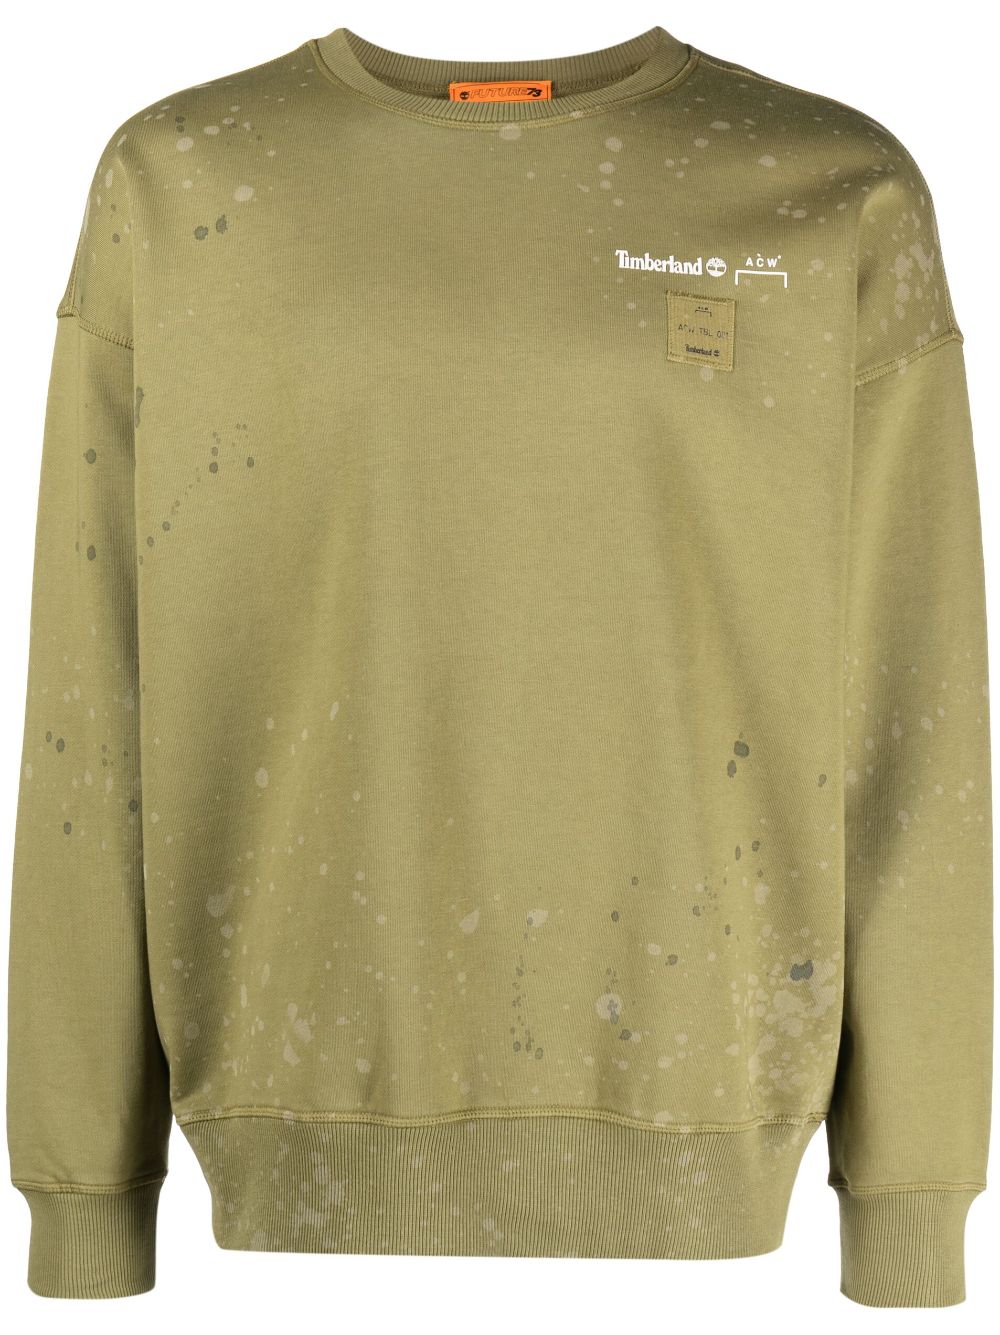 A-COLD-WALL* x Timberland faded-effect sweatshirt - Green von A-COLD-WALL*